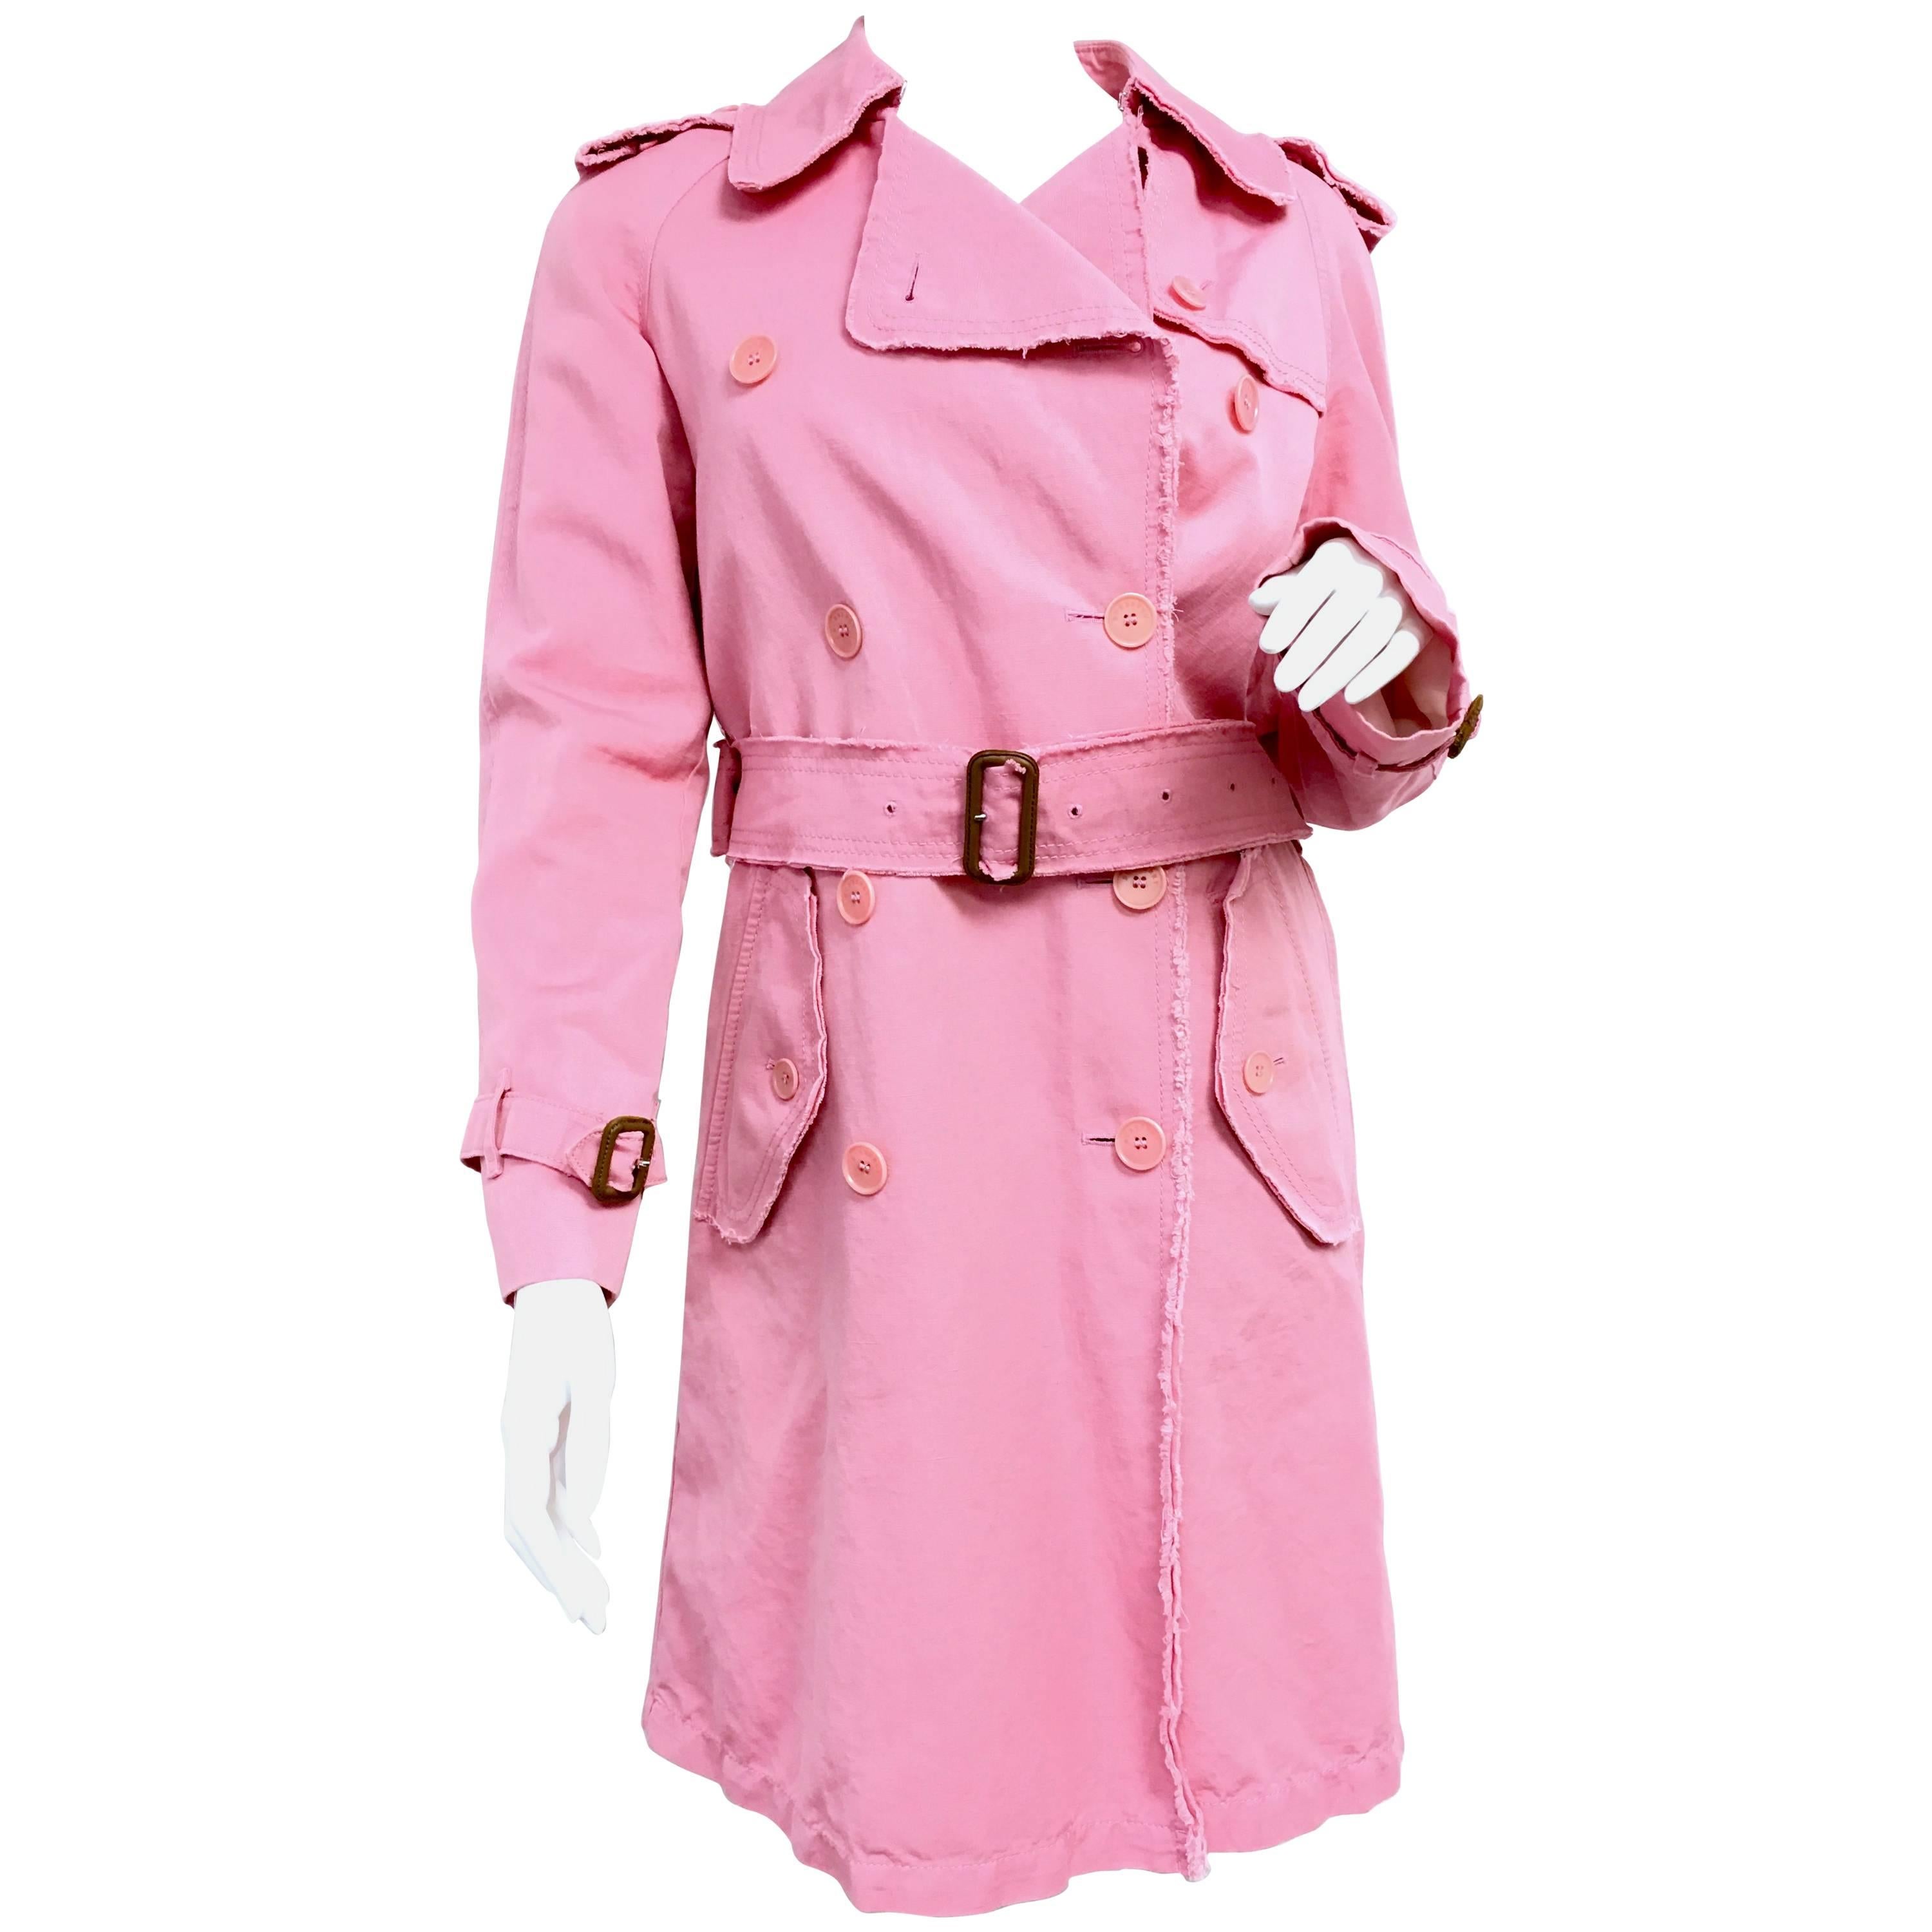  BURBERRY LONDON Signature Pink Fringed Trench Coat New For Sale